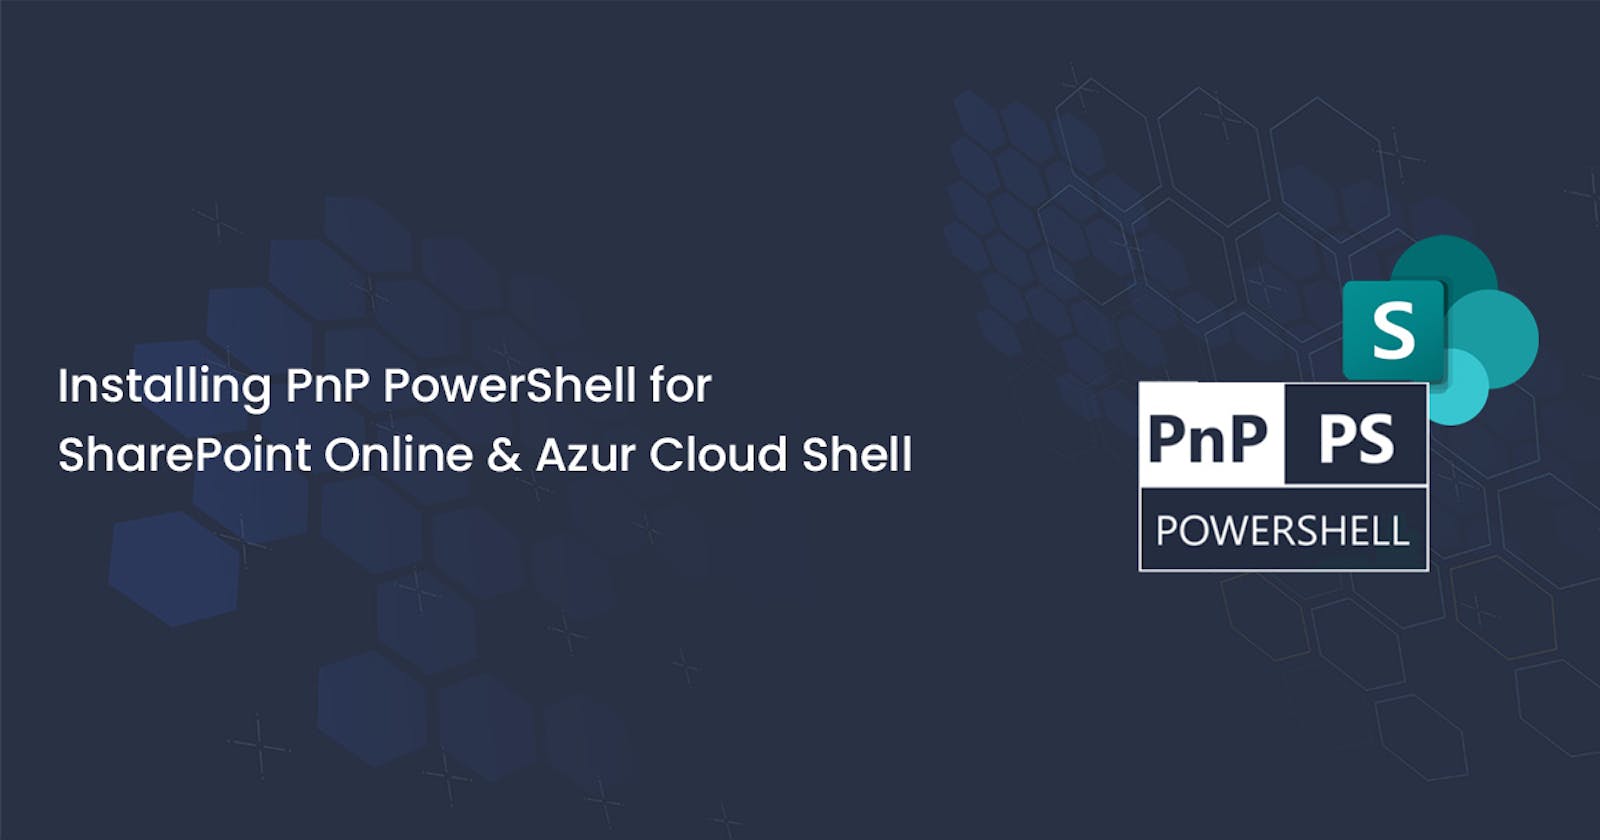 Installing PnP PowerShell for SharePoint Online and Azure Cloud Shell